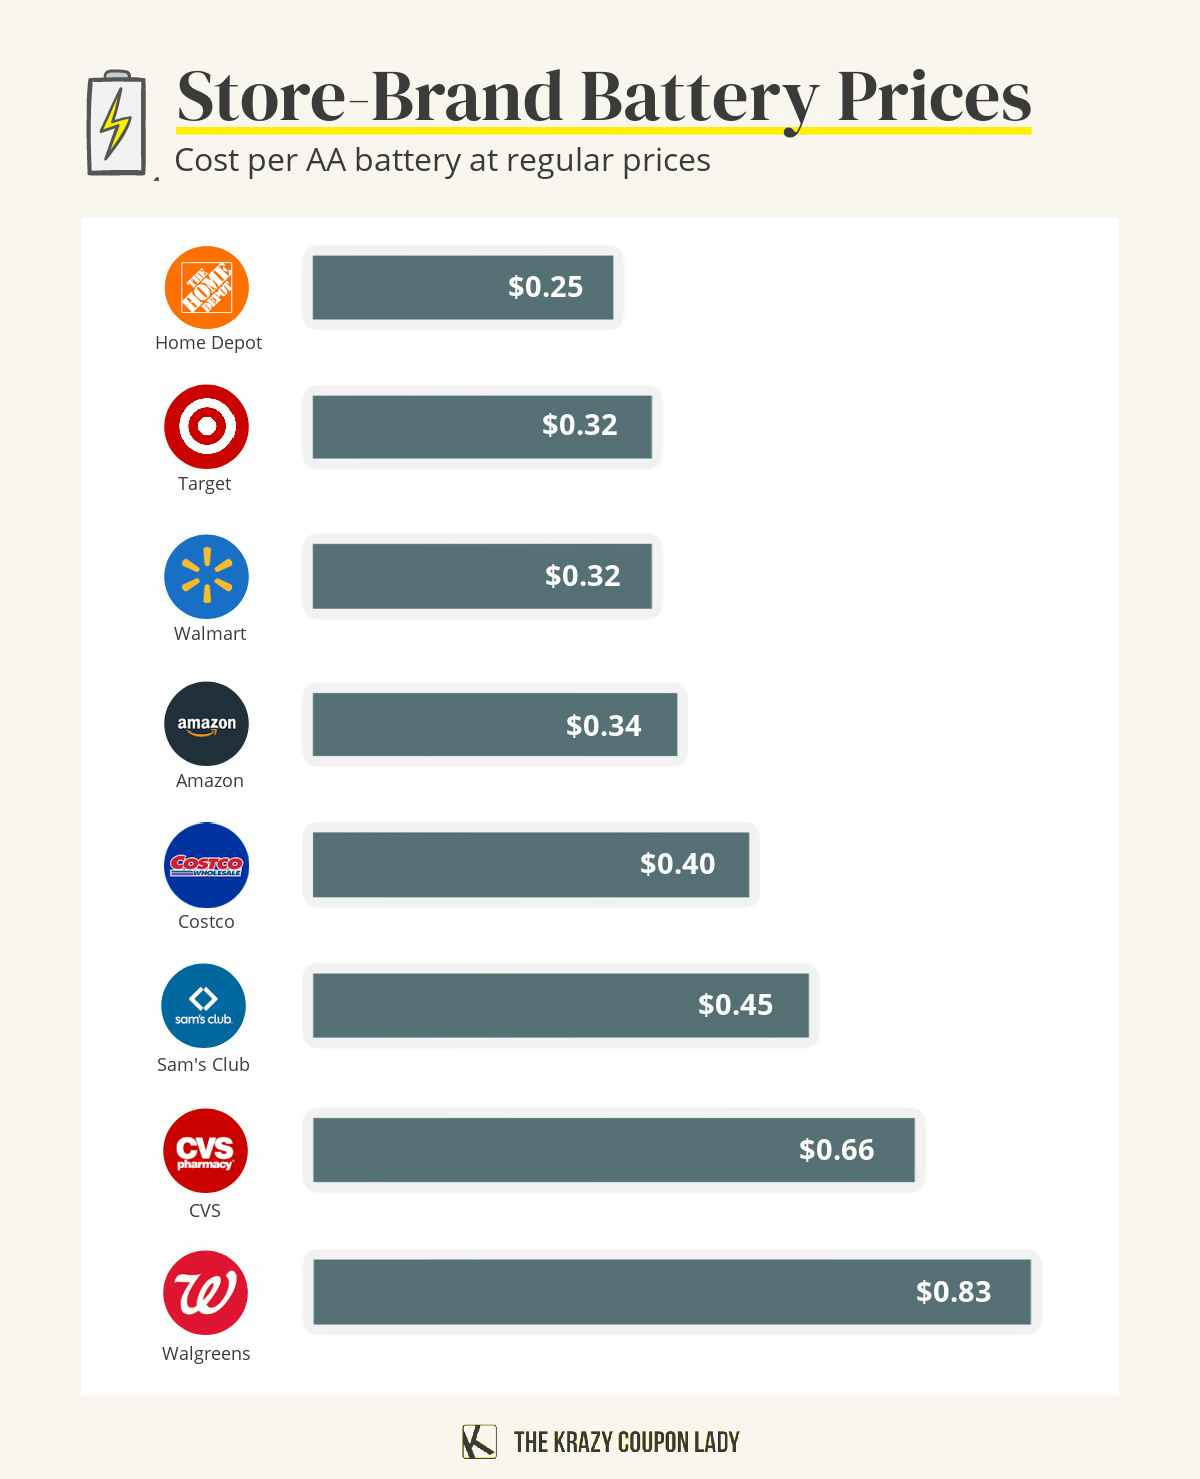 a list of store-brand costs per battery, showing that Home Depot has the cheapest batteries and Walgreens has the most expensive batteries